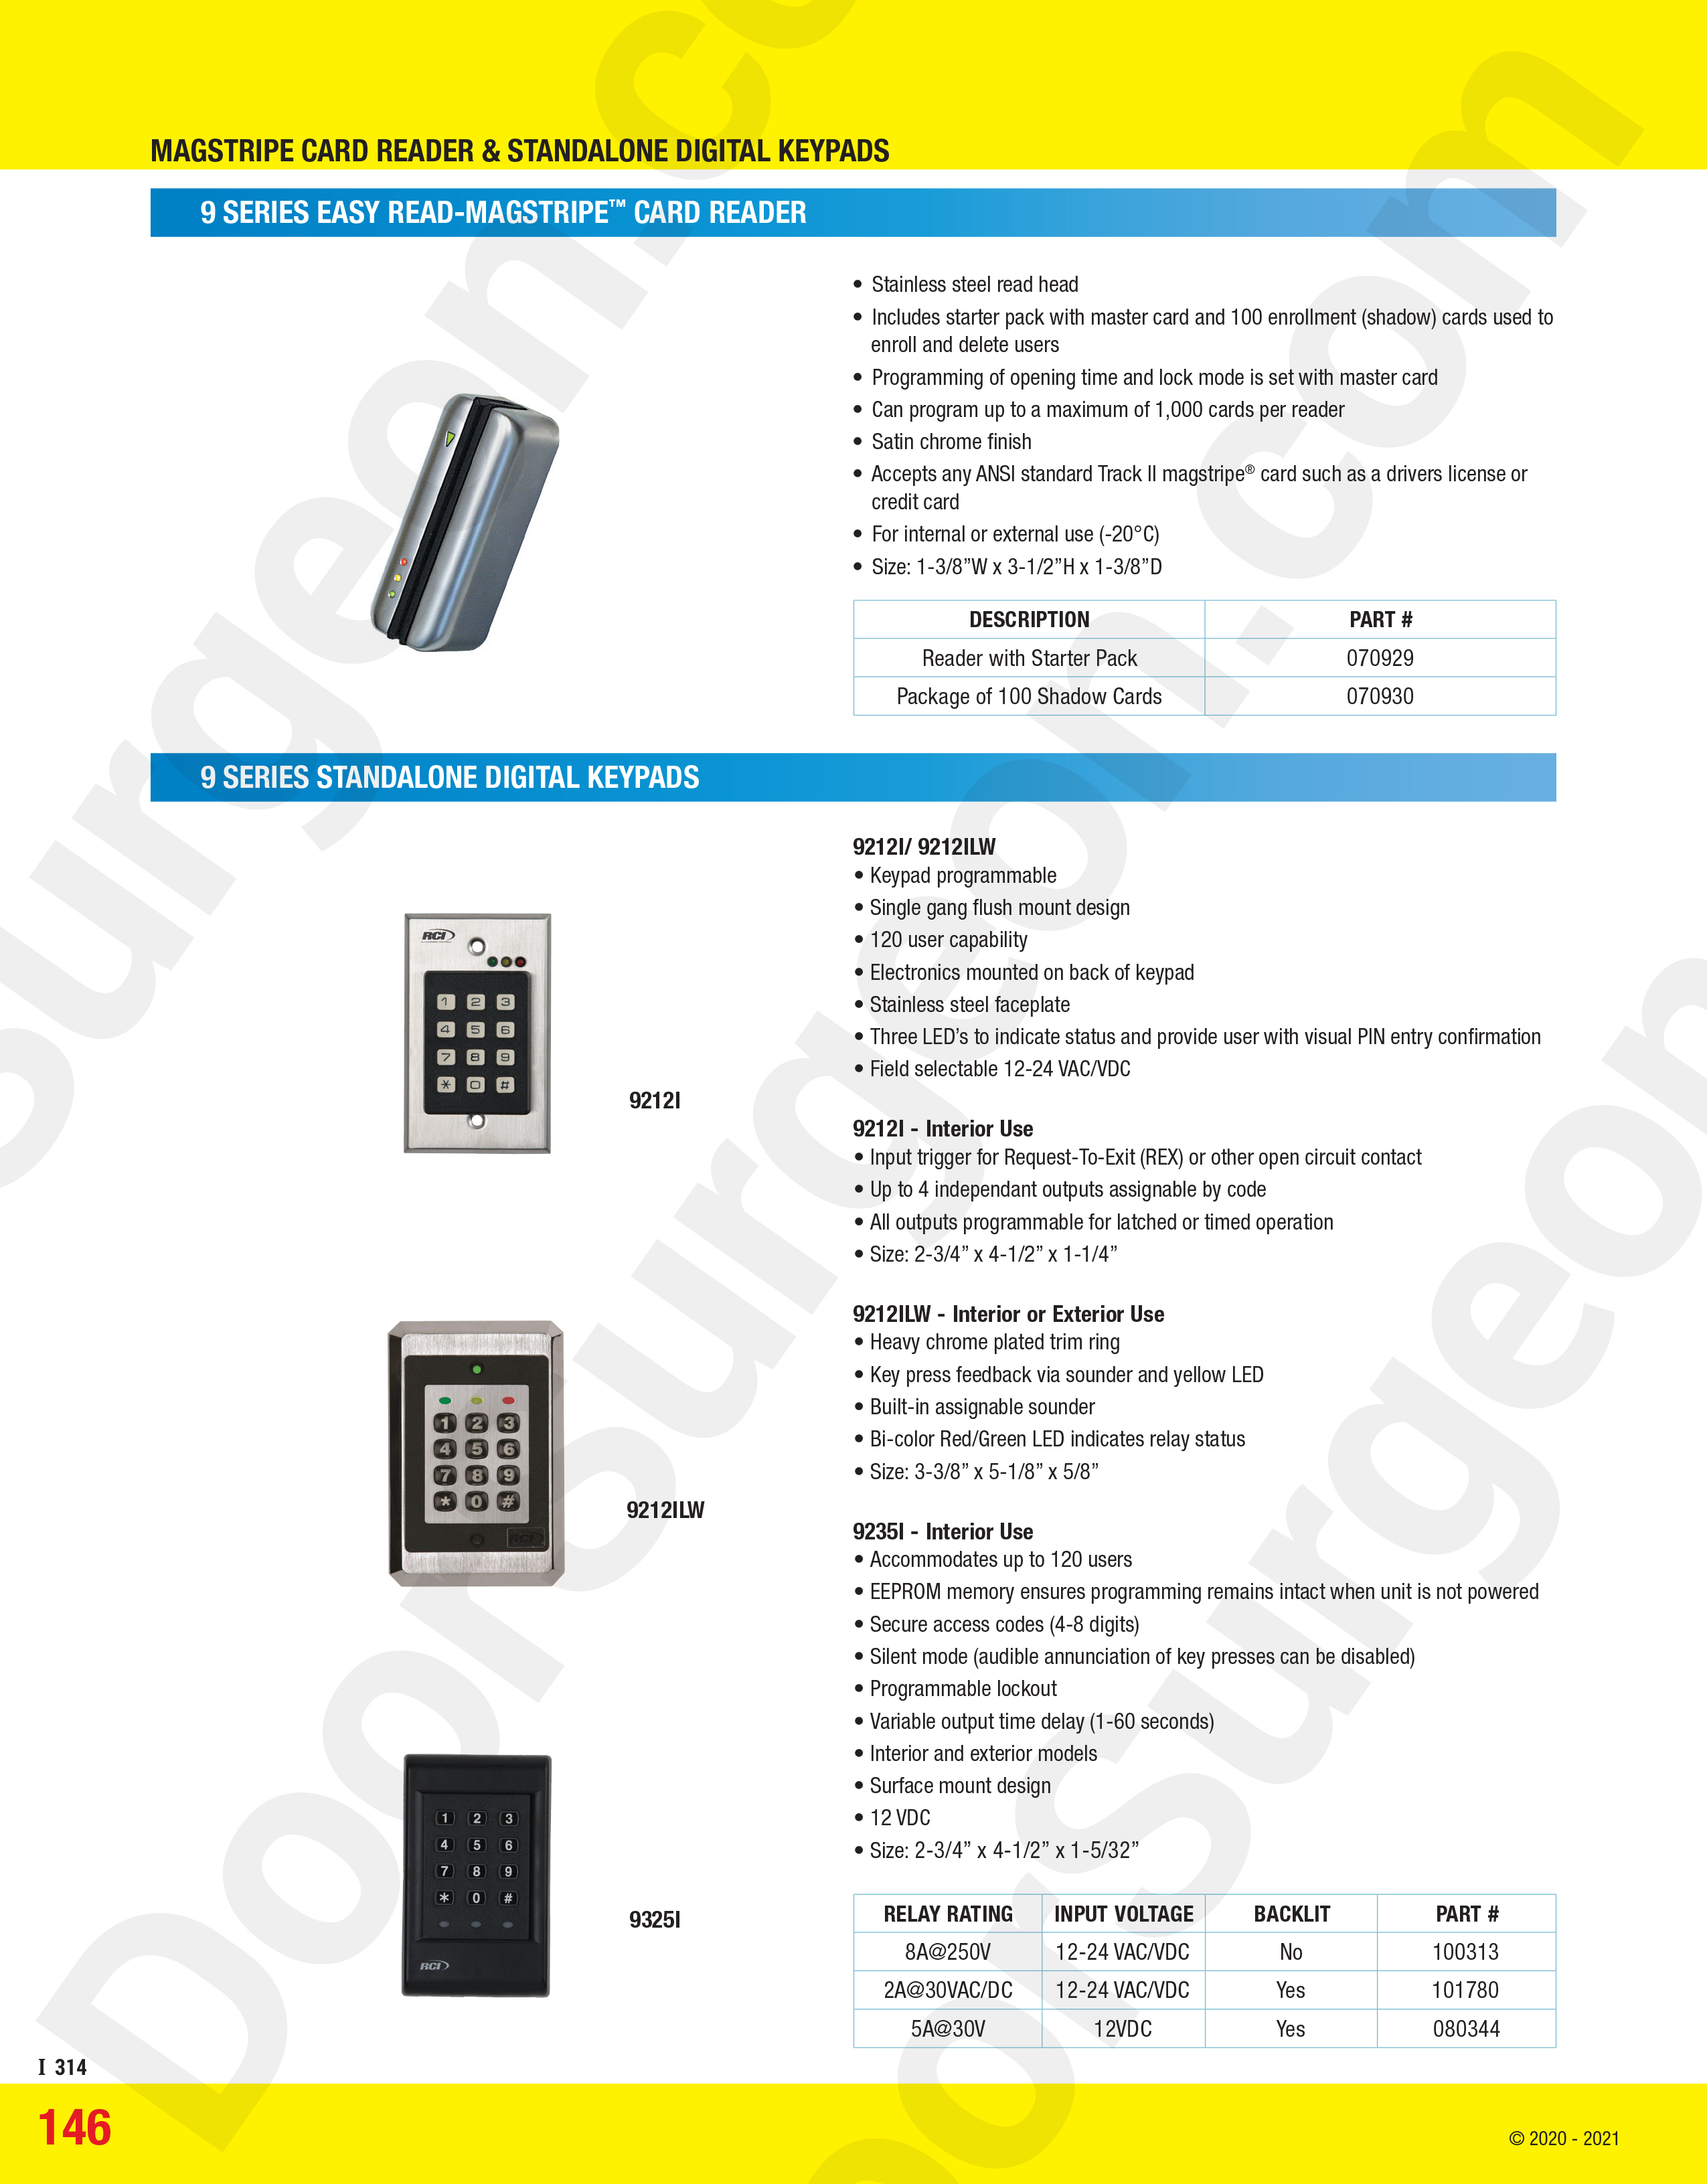 Series 9 easy-read magstripe card reader and standalone digital keypads.